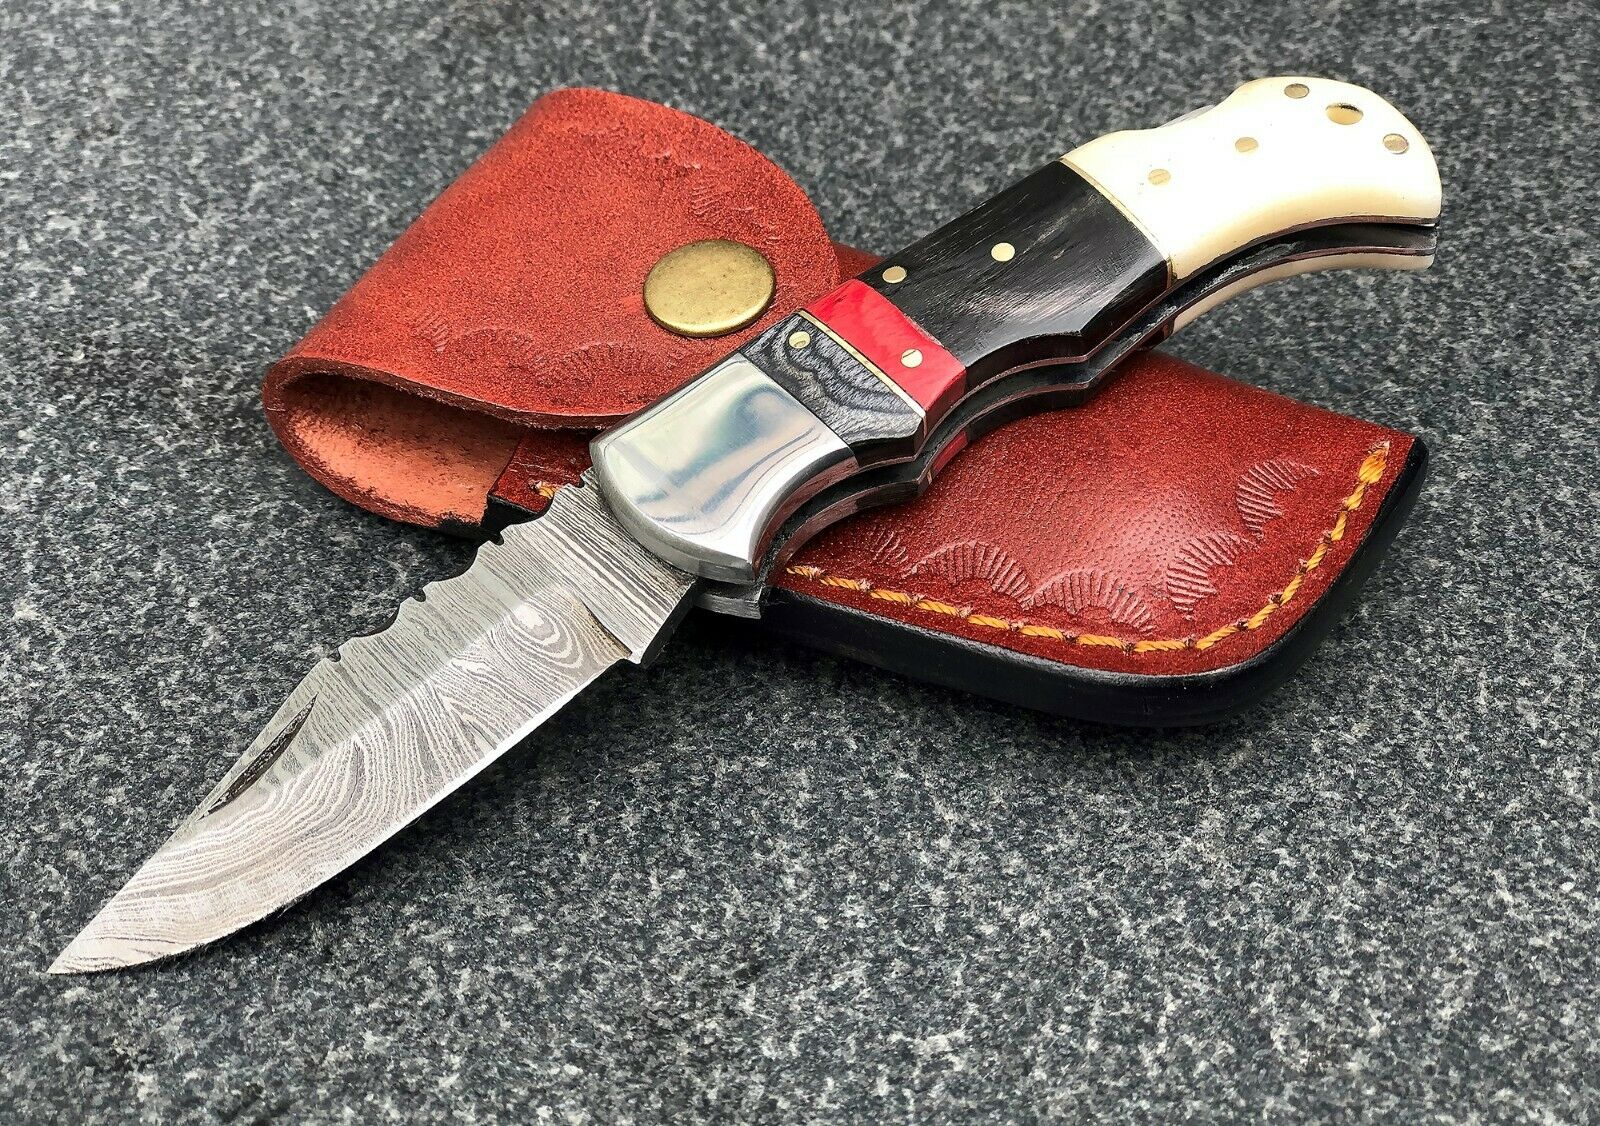 Damascus Steel Folding Knife With Stainless Steel Wood Handle + Leather Sheath